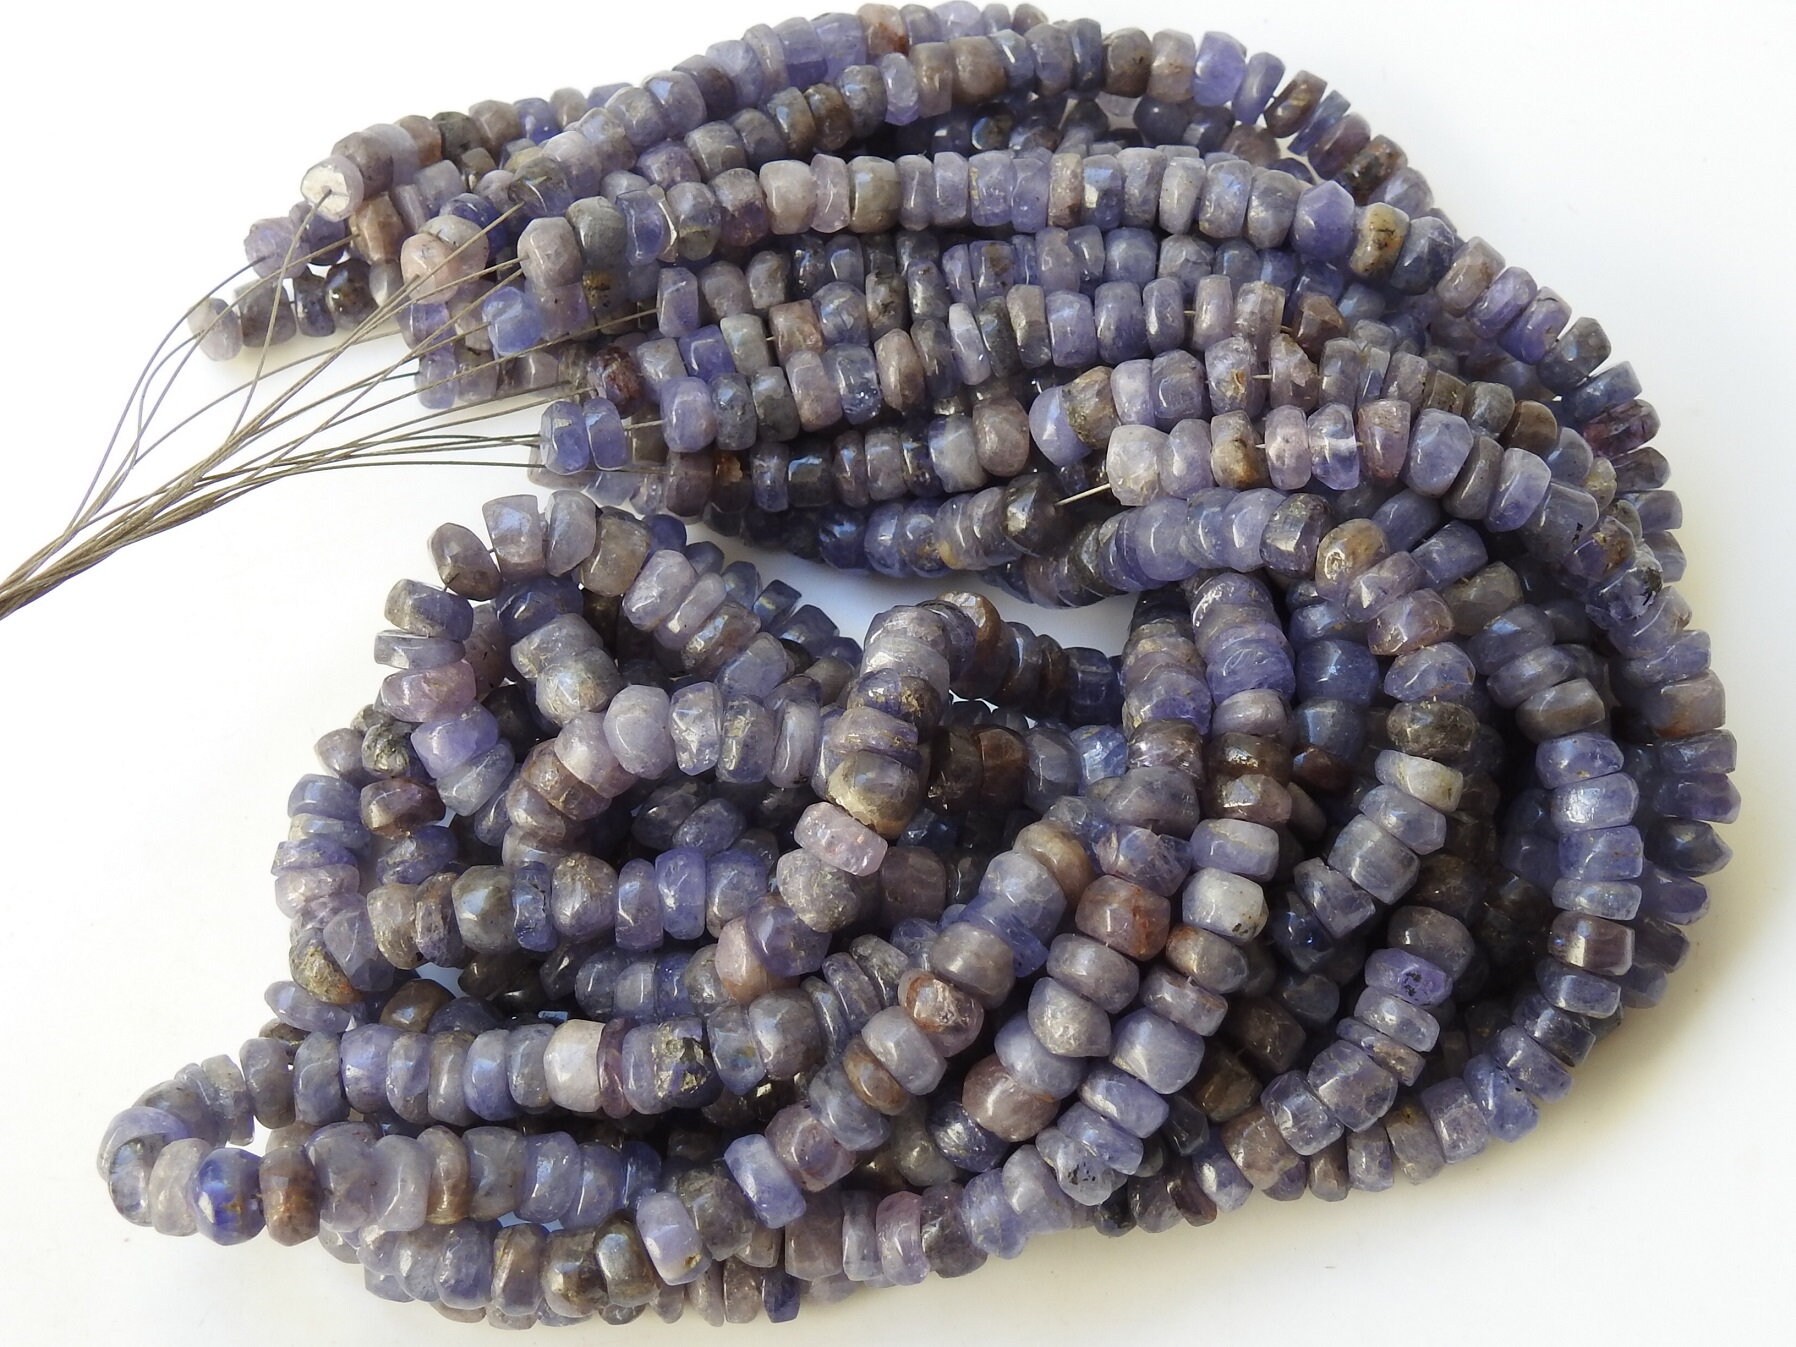 Tanzanite Smooth Roundel Beads,Loose Stone,Handmade,For Making Jewelry,Wholesale Price,New Arrival,16Inch Strand,100%Natural B8 | Save 33% - Rajasthan Living 19